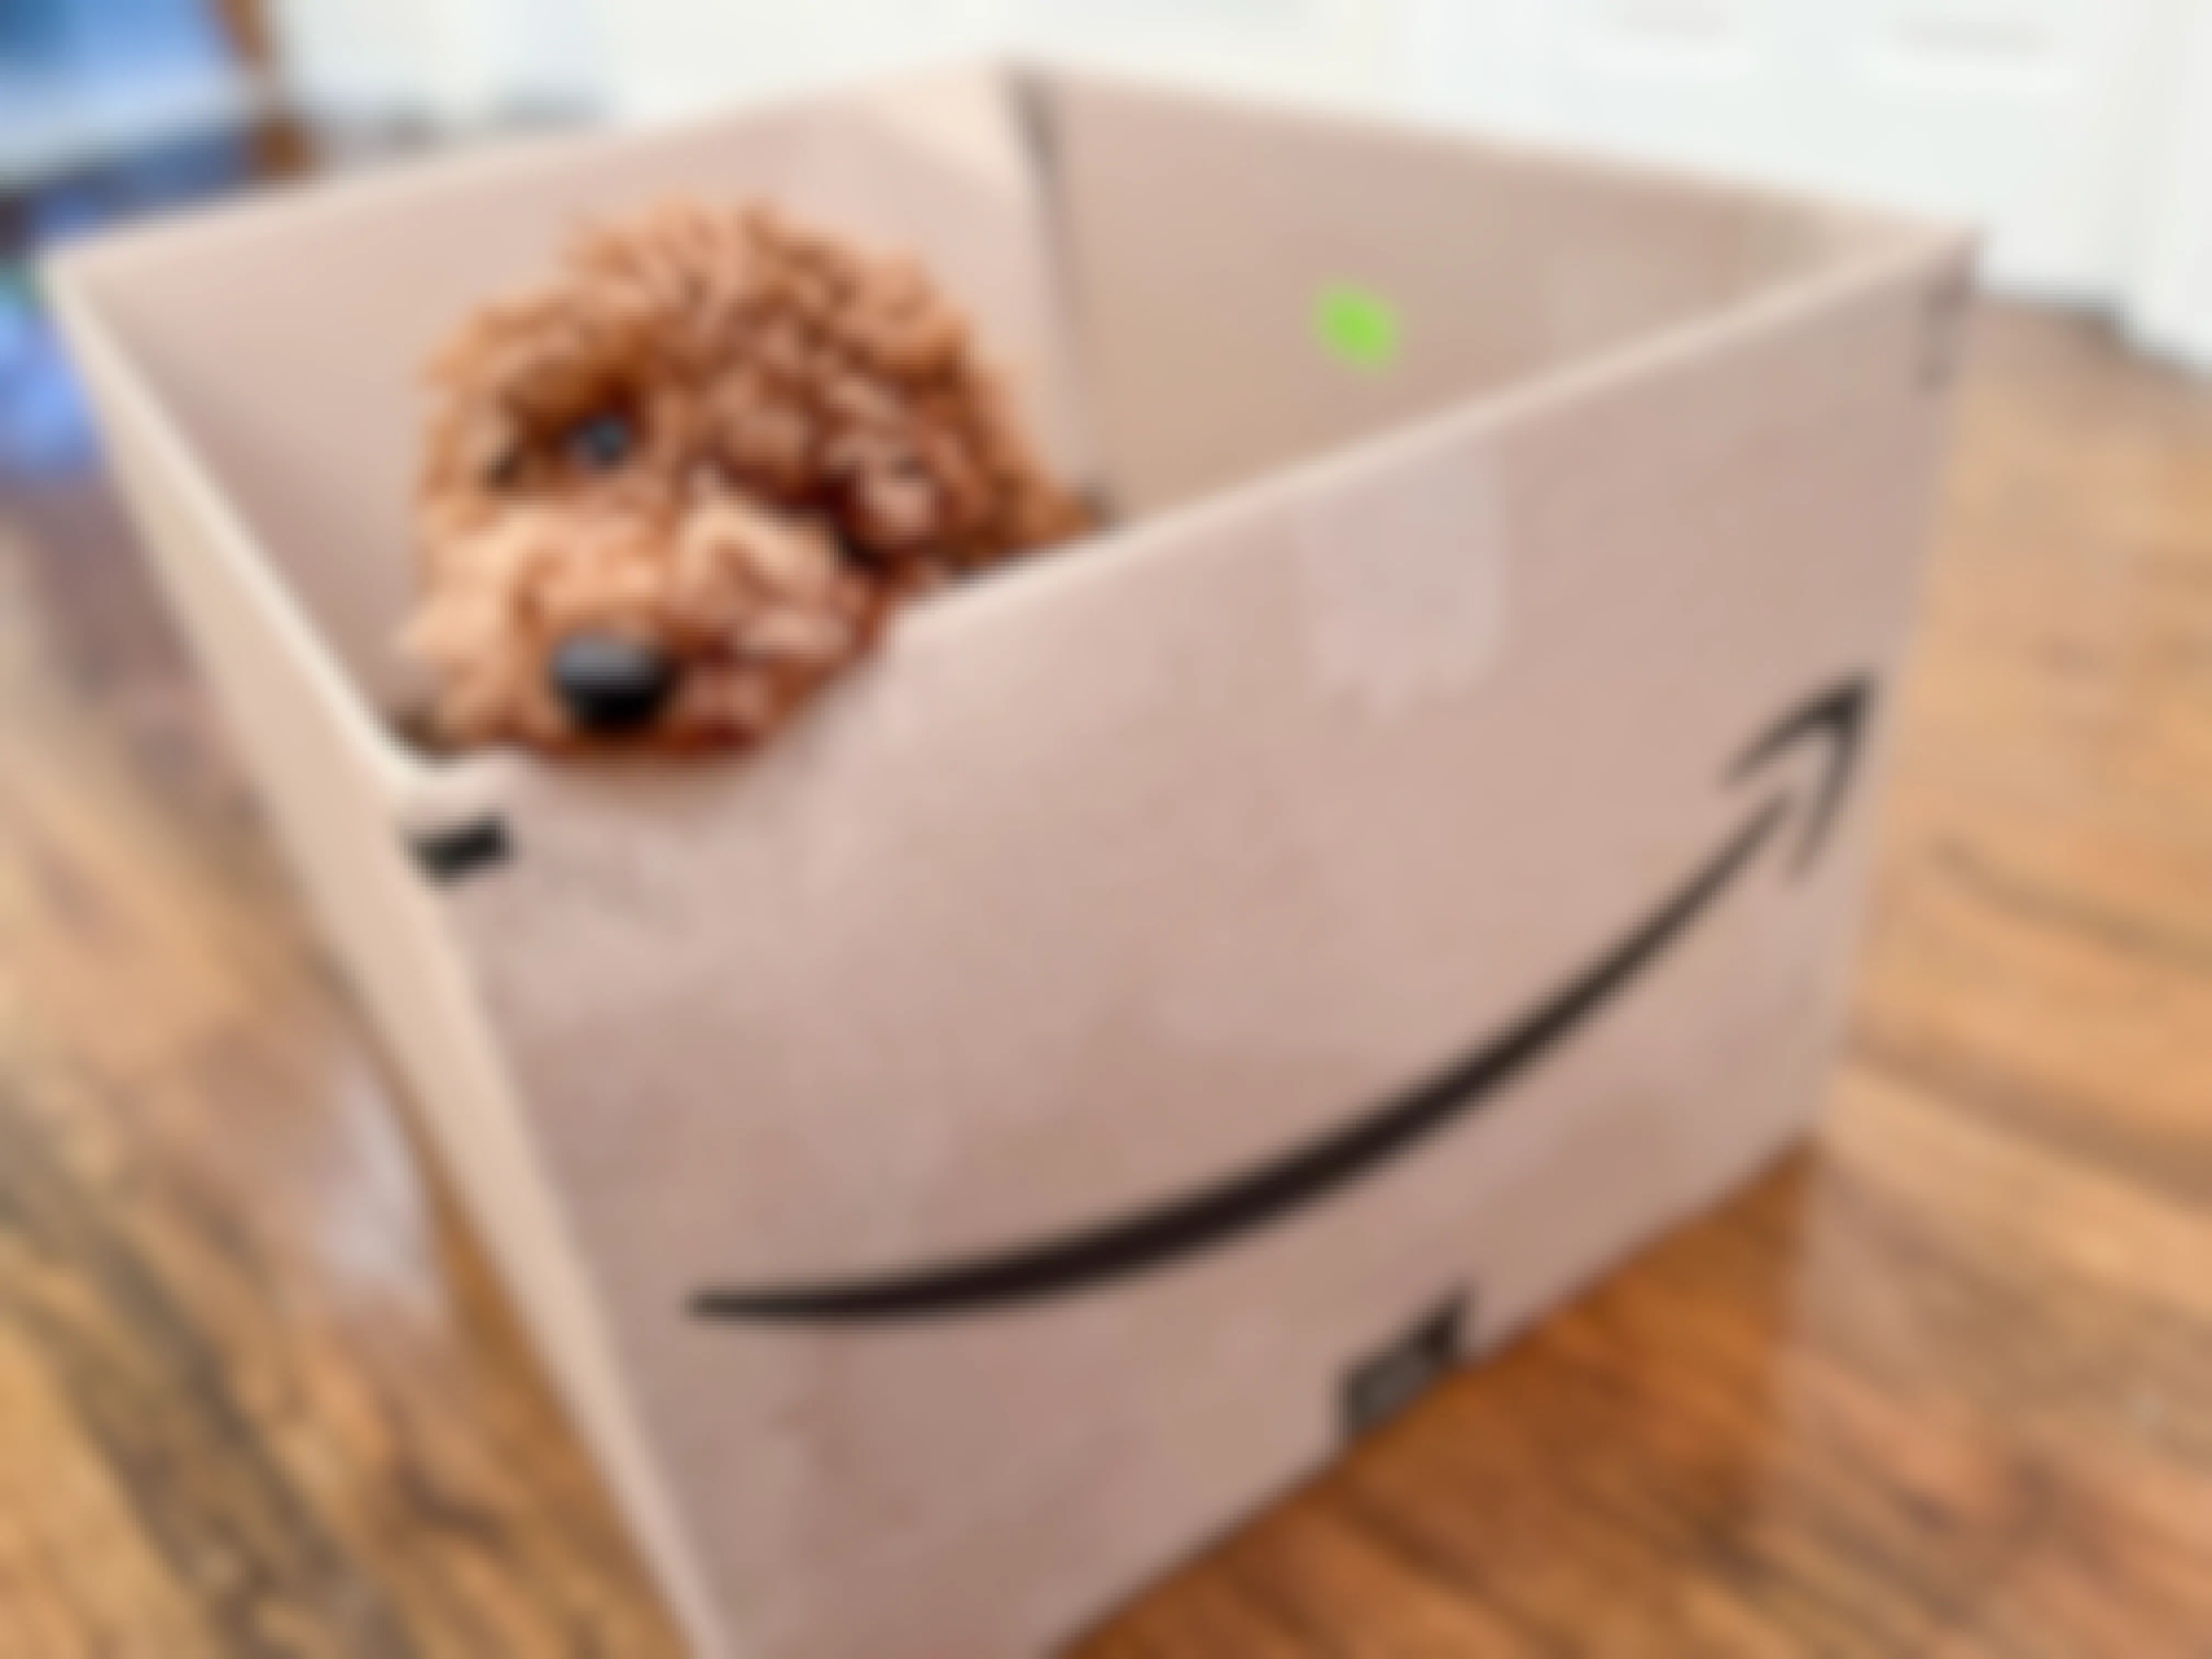 Amazon Pet Day Happening Now: Deals End Tonight at Midnight